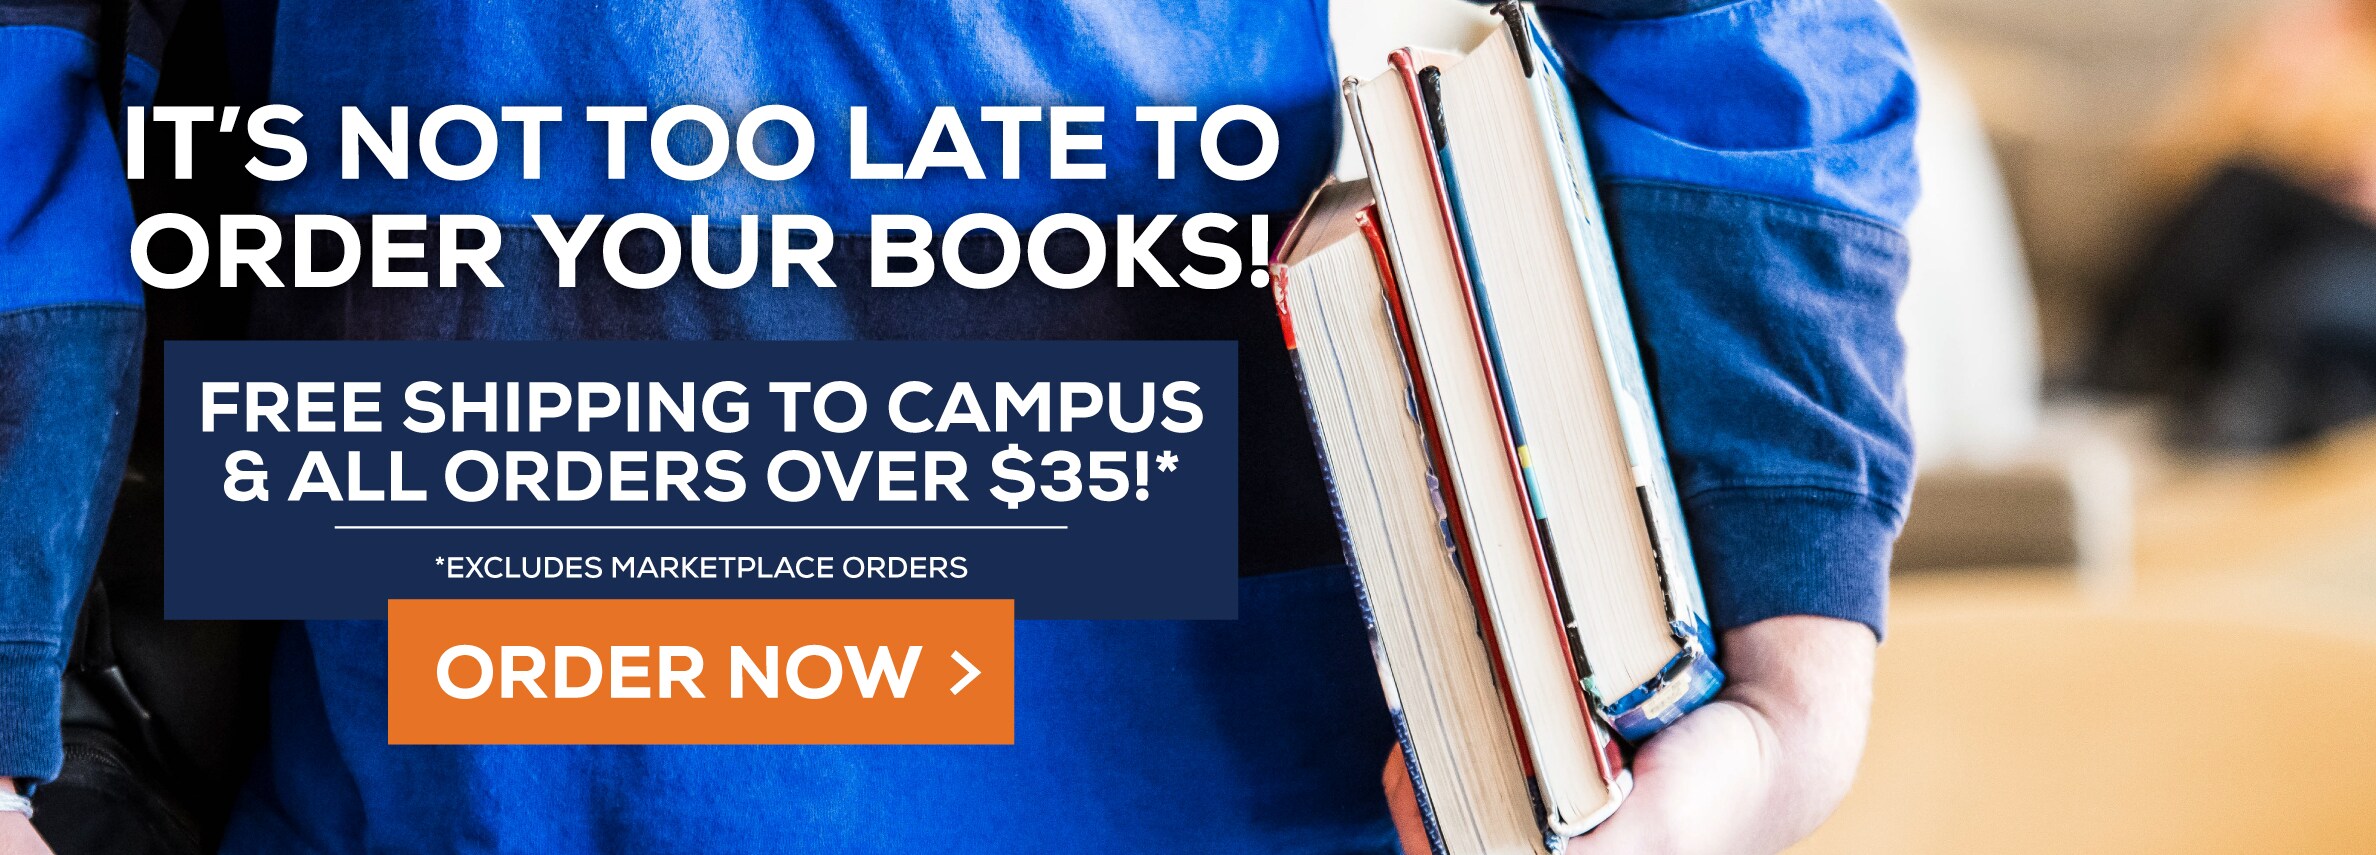 It's not too late to order your textbooks! Free shipping to campus and all orders over $35.* Excludes Marketplace Purchases. Order now						 						